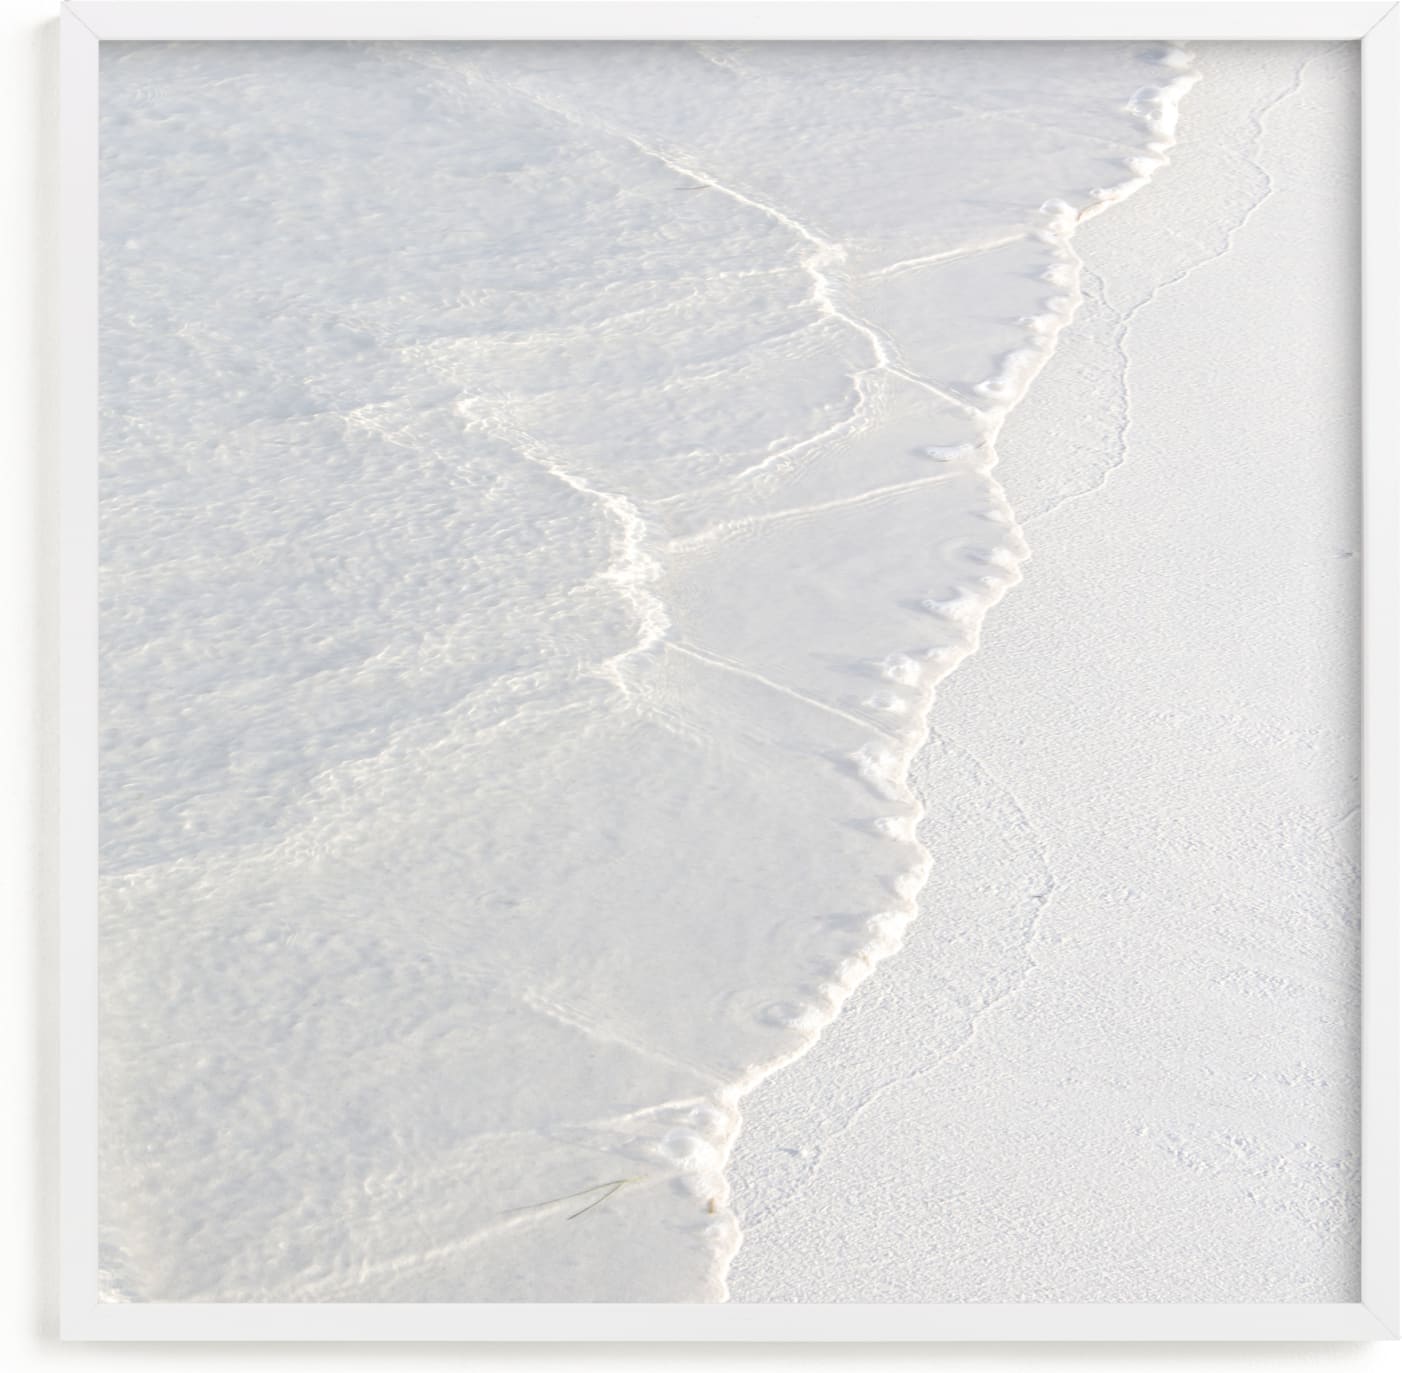 This is a white art by Lisa Sundin called White Water .